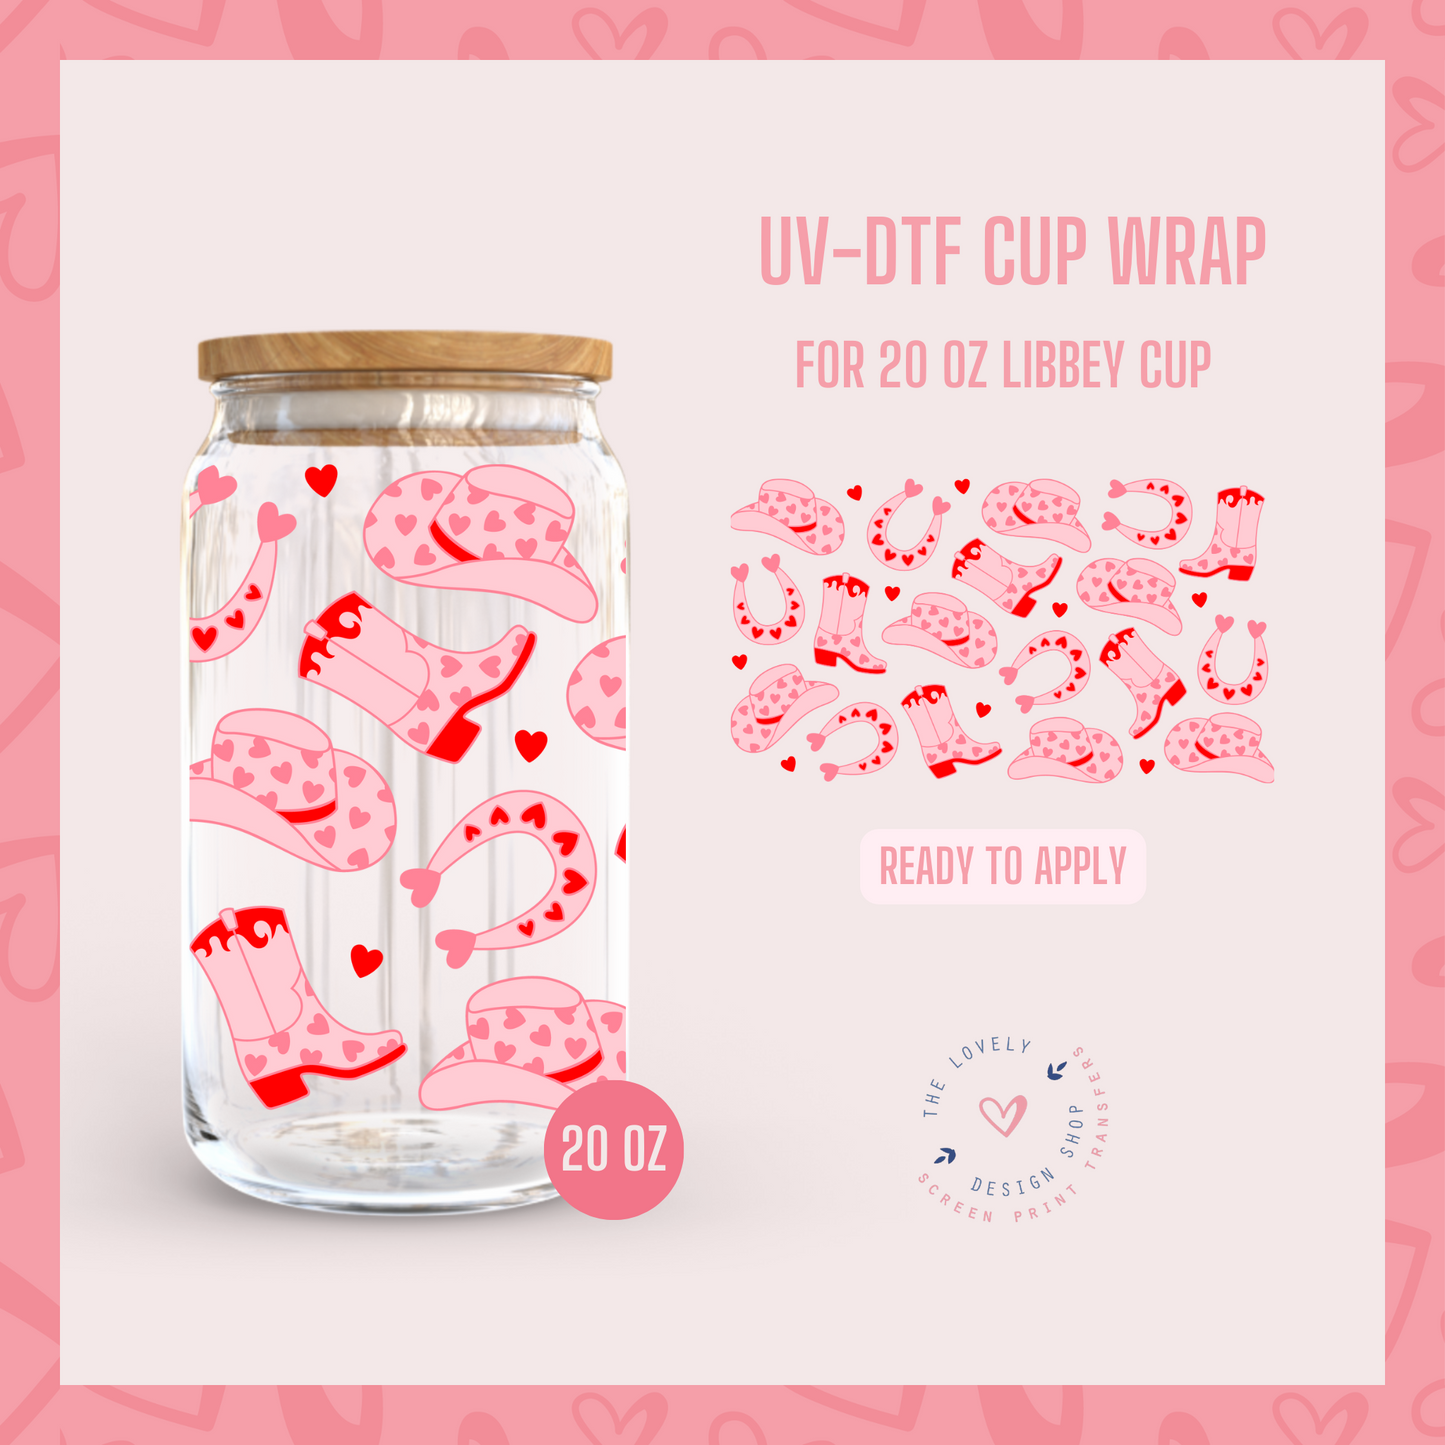 Cowgirl Heart - UV DTF 20 oz Libbey Cup Wrap (Ready to Ship) Apr 29